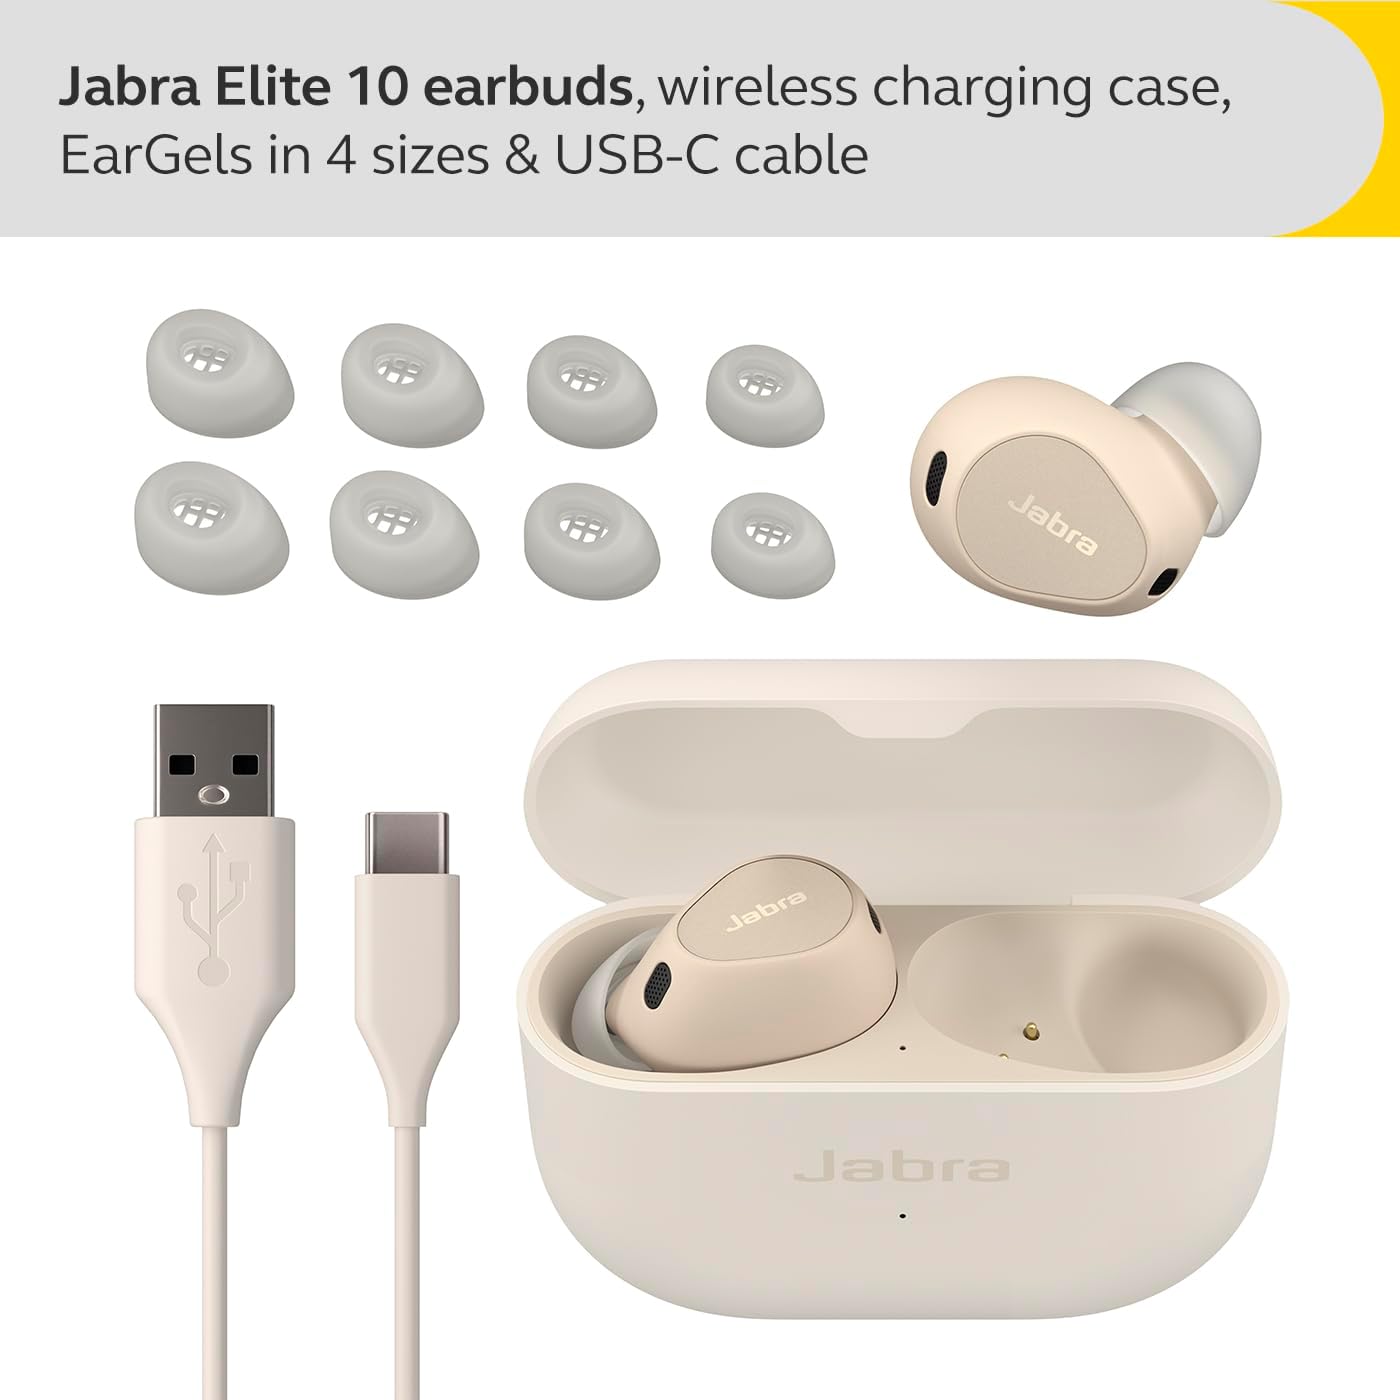 Jabra Elite 10 launches as new premium earbuds for US$249.99 -   News